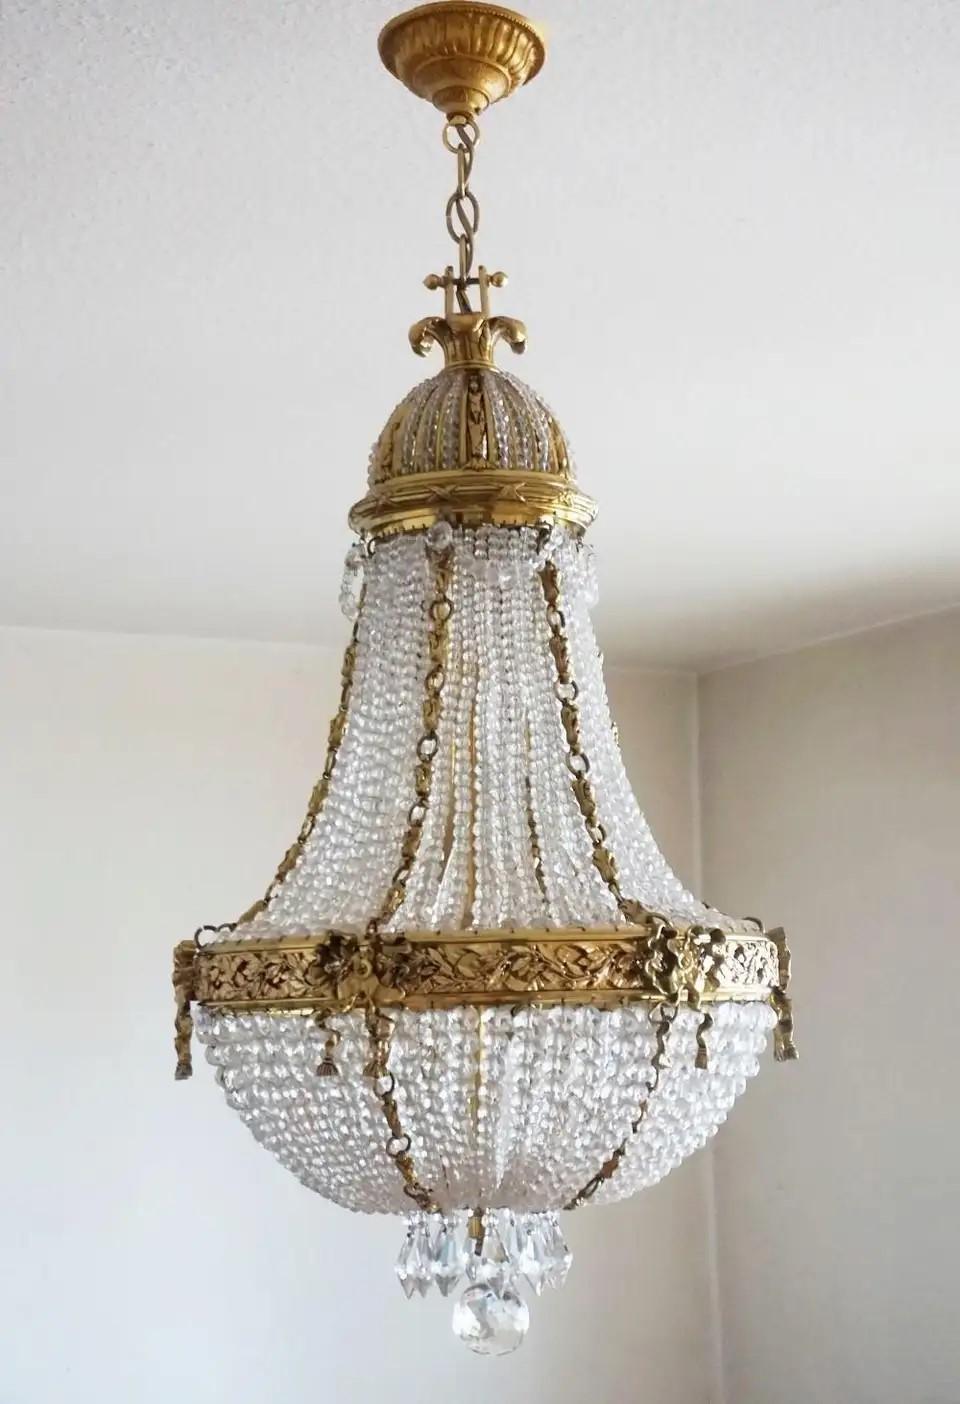 A wonderful Empire style bronze parcel brass crystal beaded chandelier, France mid-19th century. Beads, drops, and bottom ball are of genuine crystal, solid bronze and brass richly elaborate in precise detail, decorated with fine brass chains in